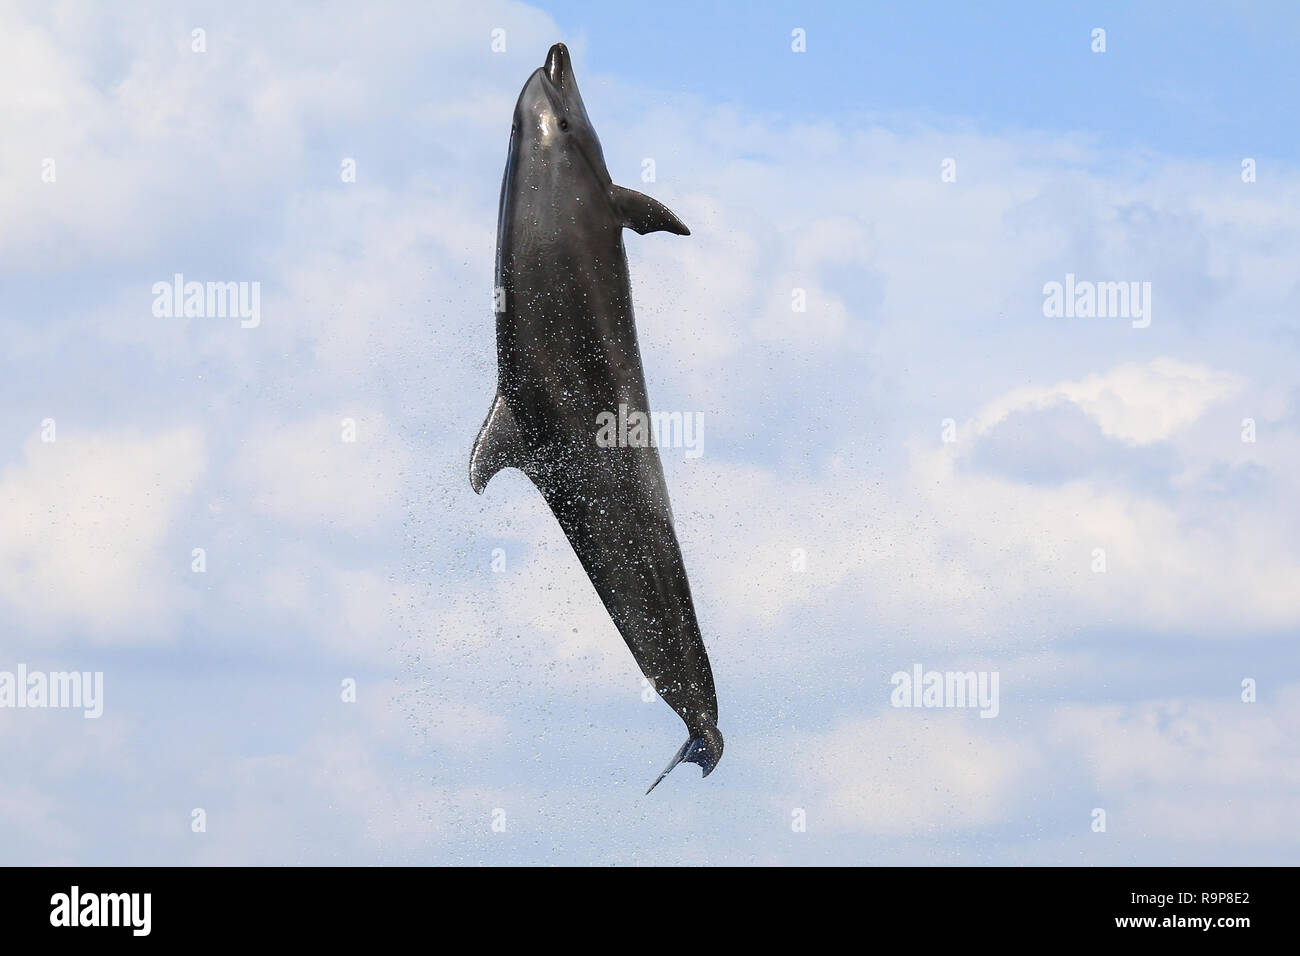 dolphin jumping and performing in a pool, Okinawa, Japan Stock Photo